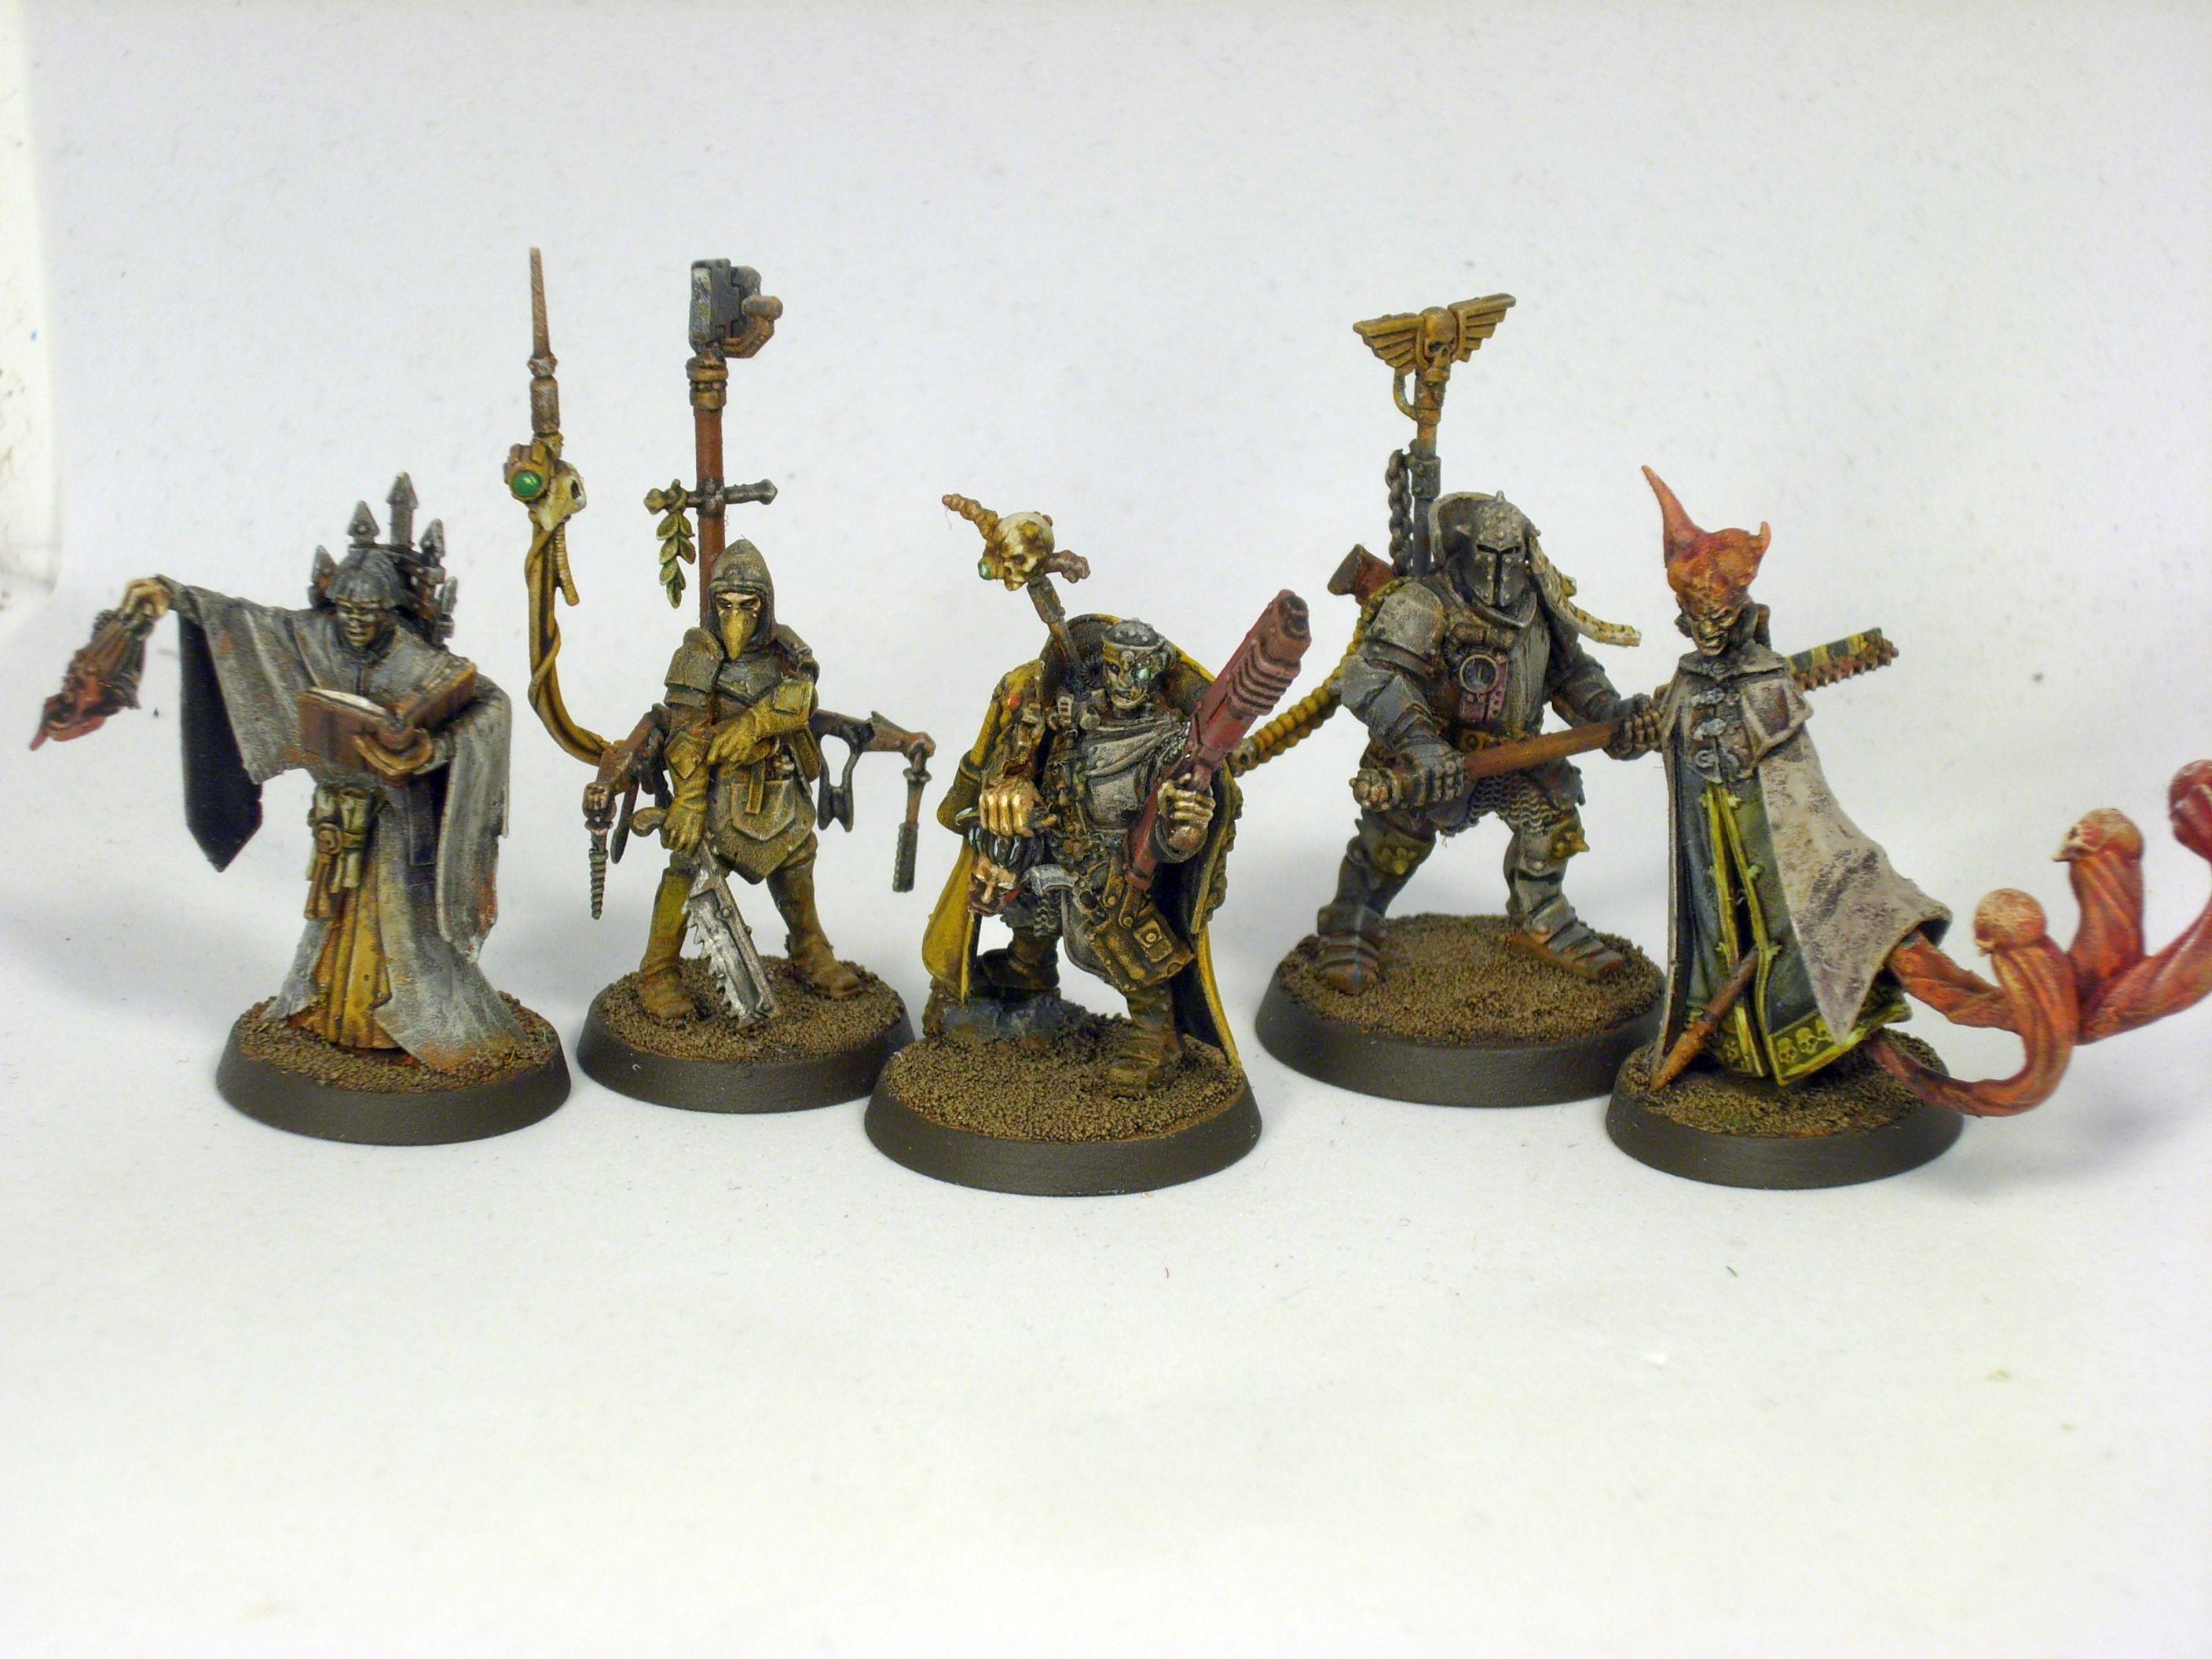 Acolytes, Blanchitsu, Cities Of Sigmar, Command Corps, Command Squad, Conversion, Grimdark, Inq28, Inquisition, Inquisitor, Kill Team, Painting Warhammer, Warband, Warhammer 40,000, Warhammer Community